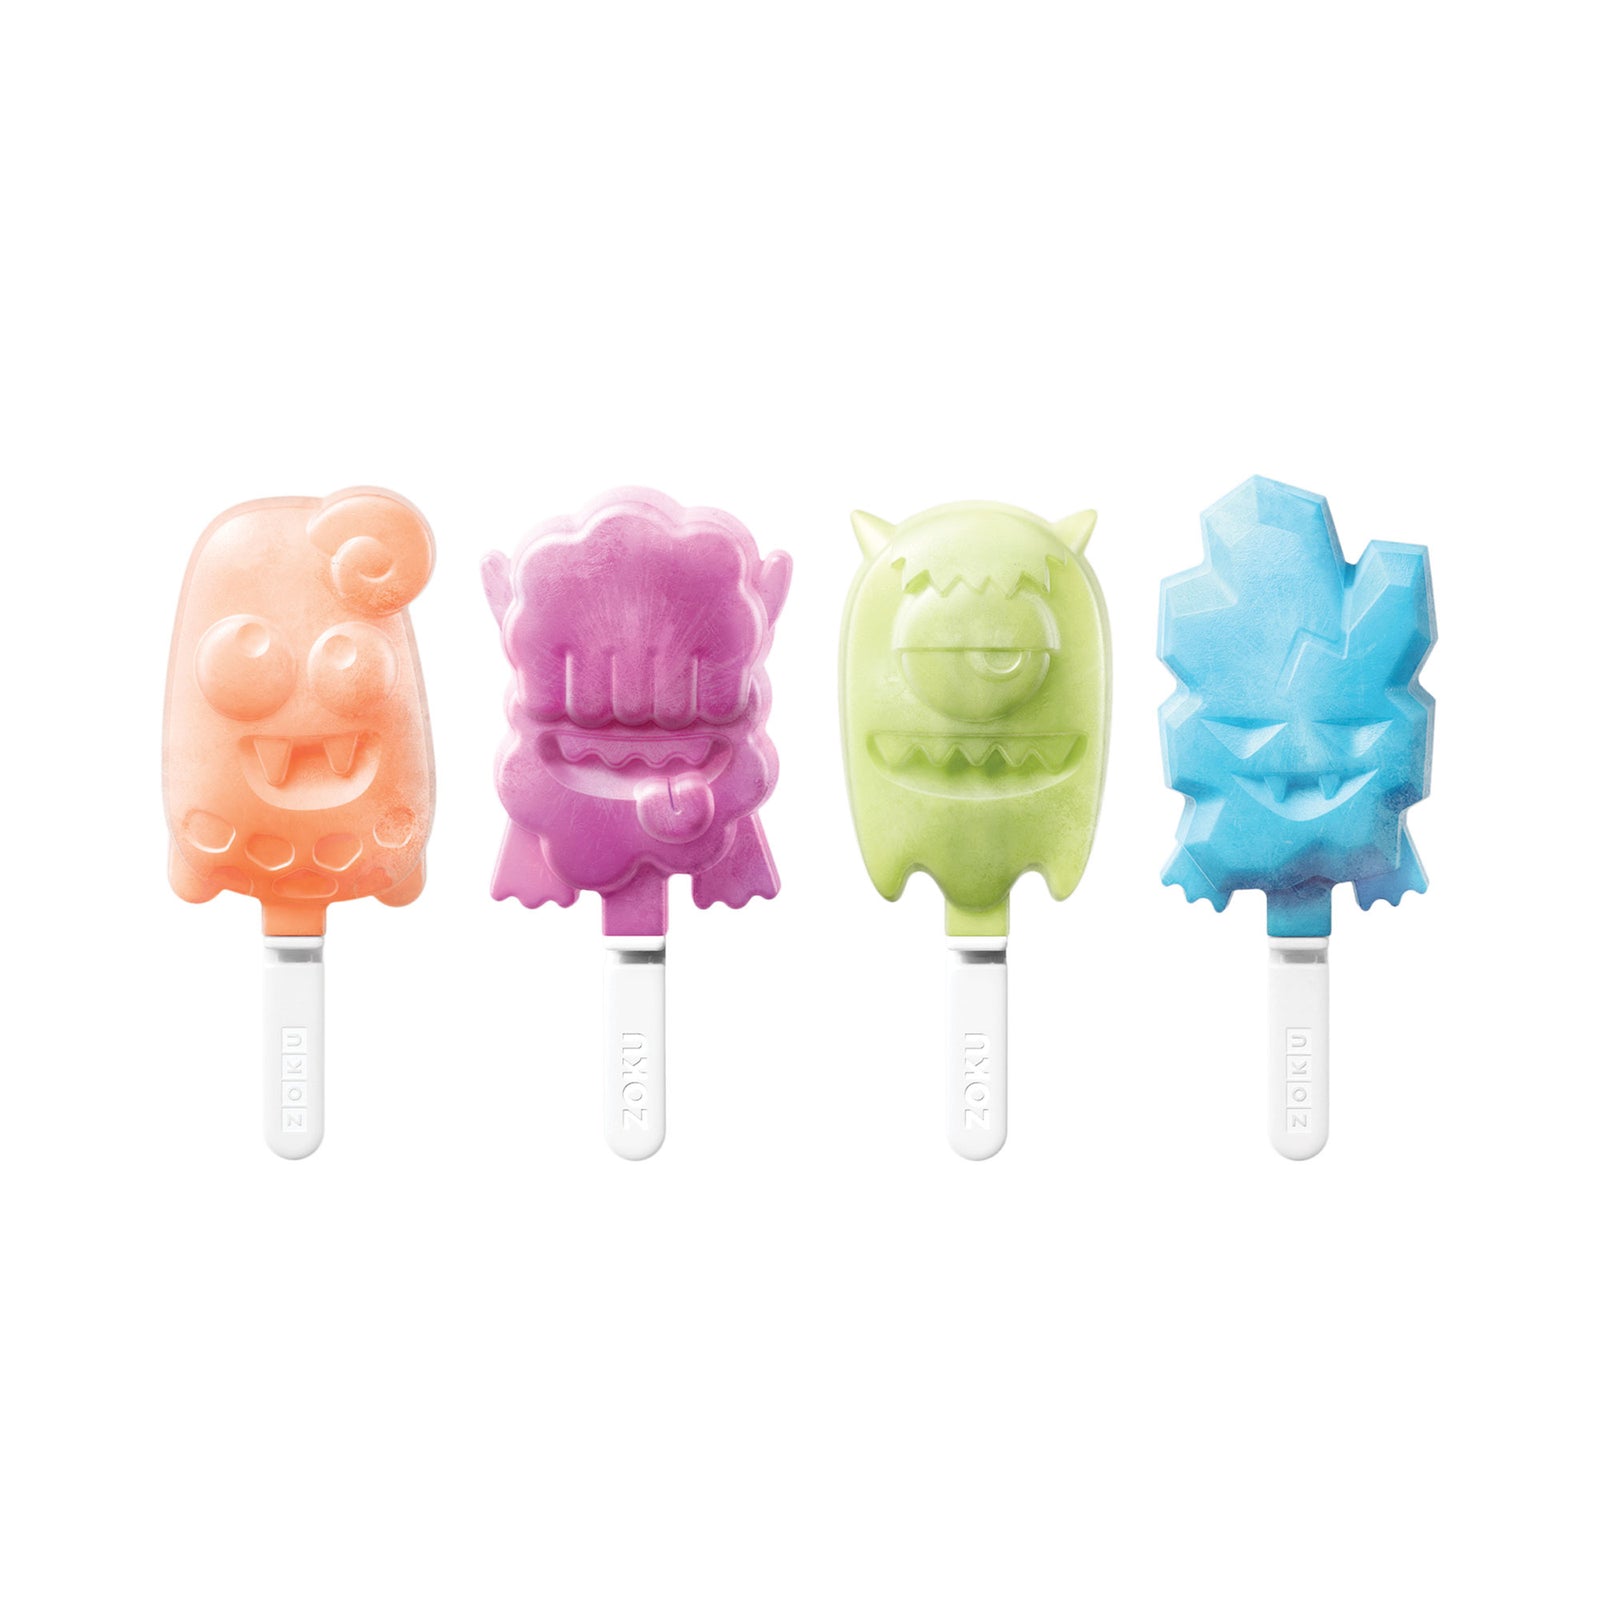 Tovolo Stackable Unicorn Pop Molds Set of Four for Making Mess